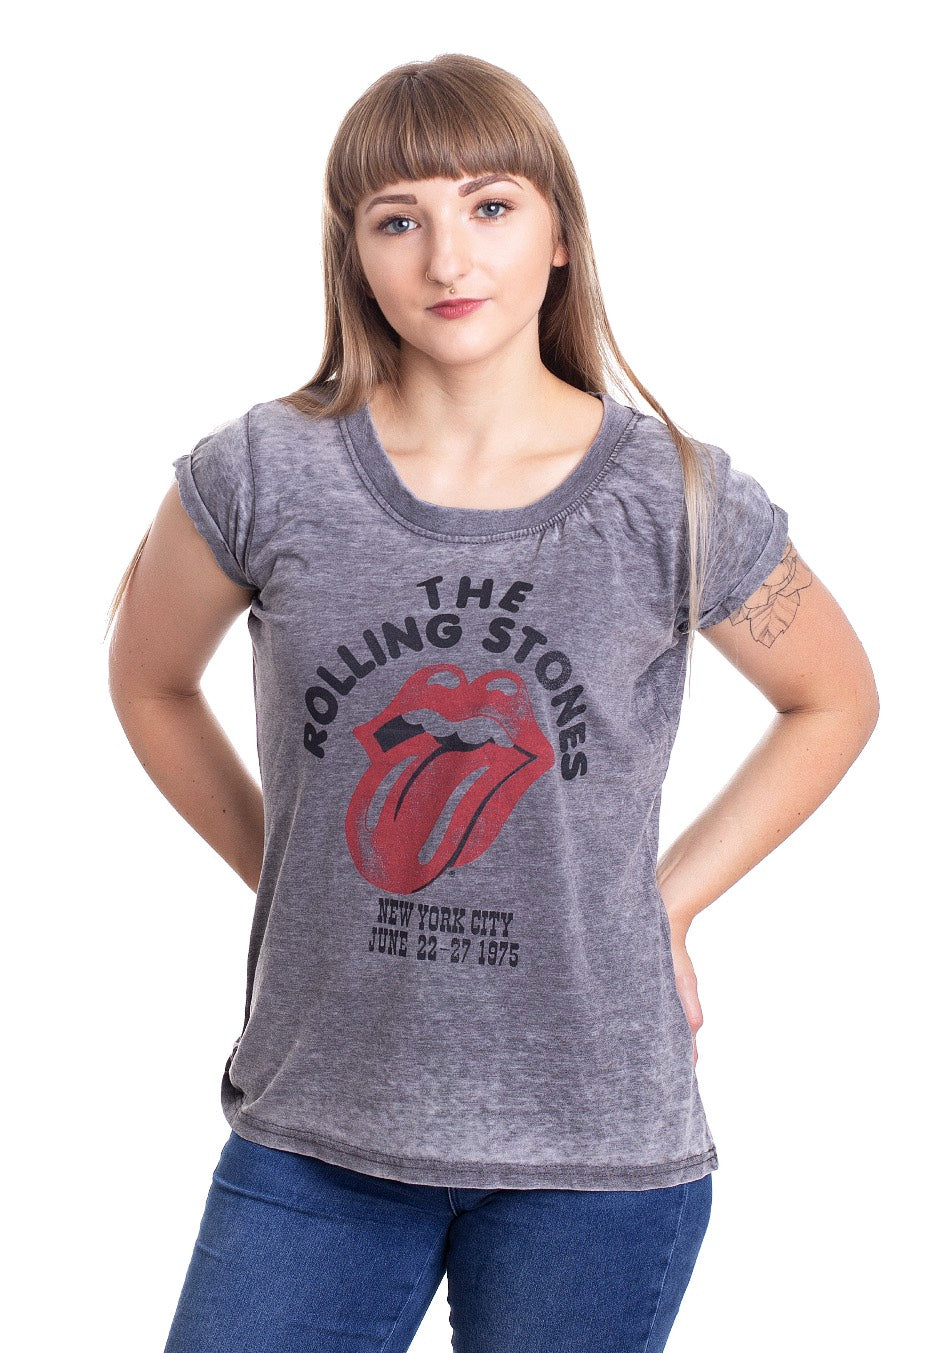 The Rolling Stones - NYC 1975 Burnout Grey - Girly